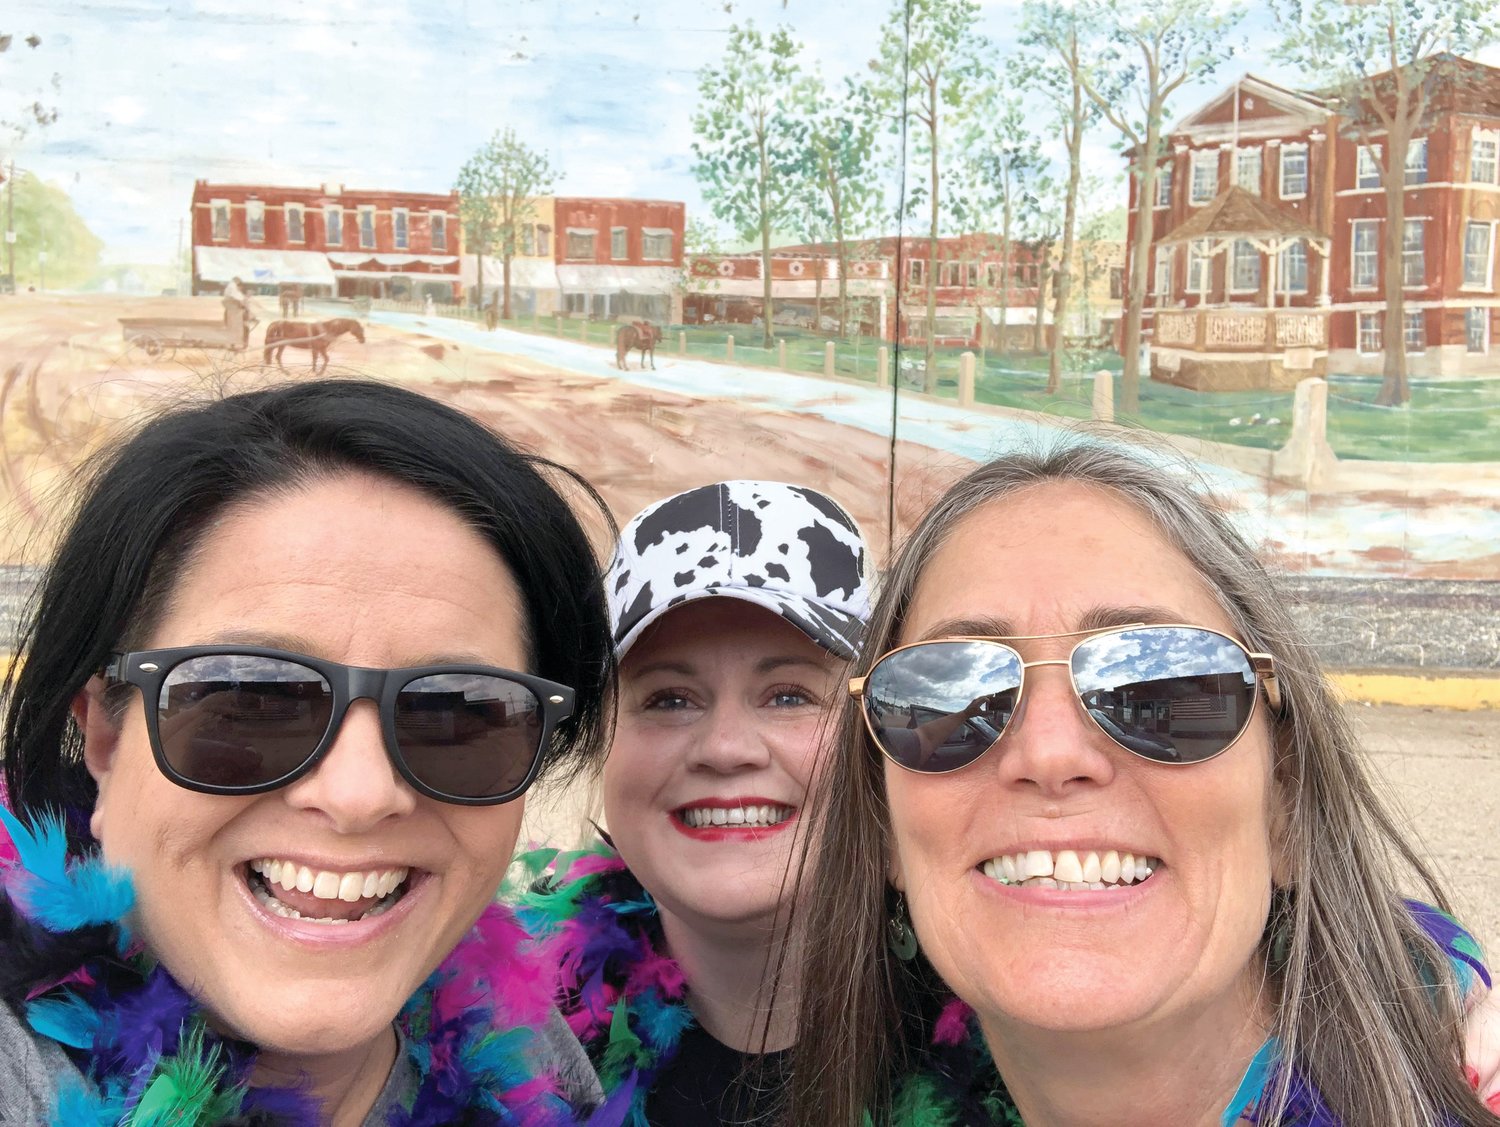 The winners of the JA Selfie Tour are team Heartland Eye Clinic (from left) Brandy Stewart, Serena Diffey, and Dina Paine. Teams searched for clues and took selfies at each checkpoint. The event was sponsored by KHOZ, Woods Disk Golf, Jake Gray from State Farm and Super Smiles Dentistry.